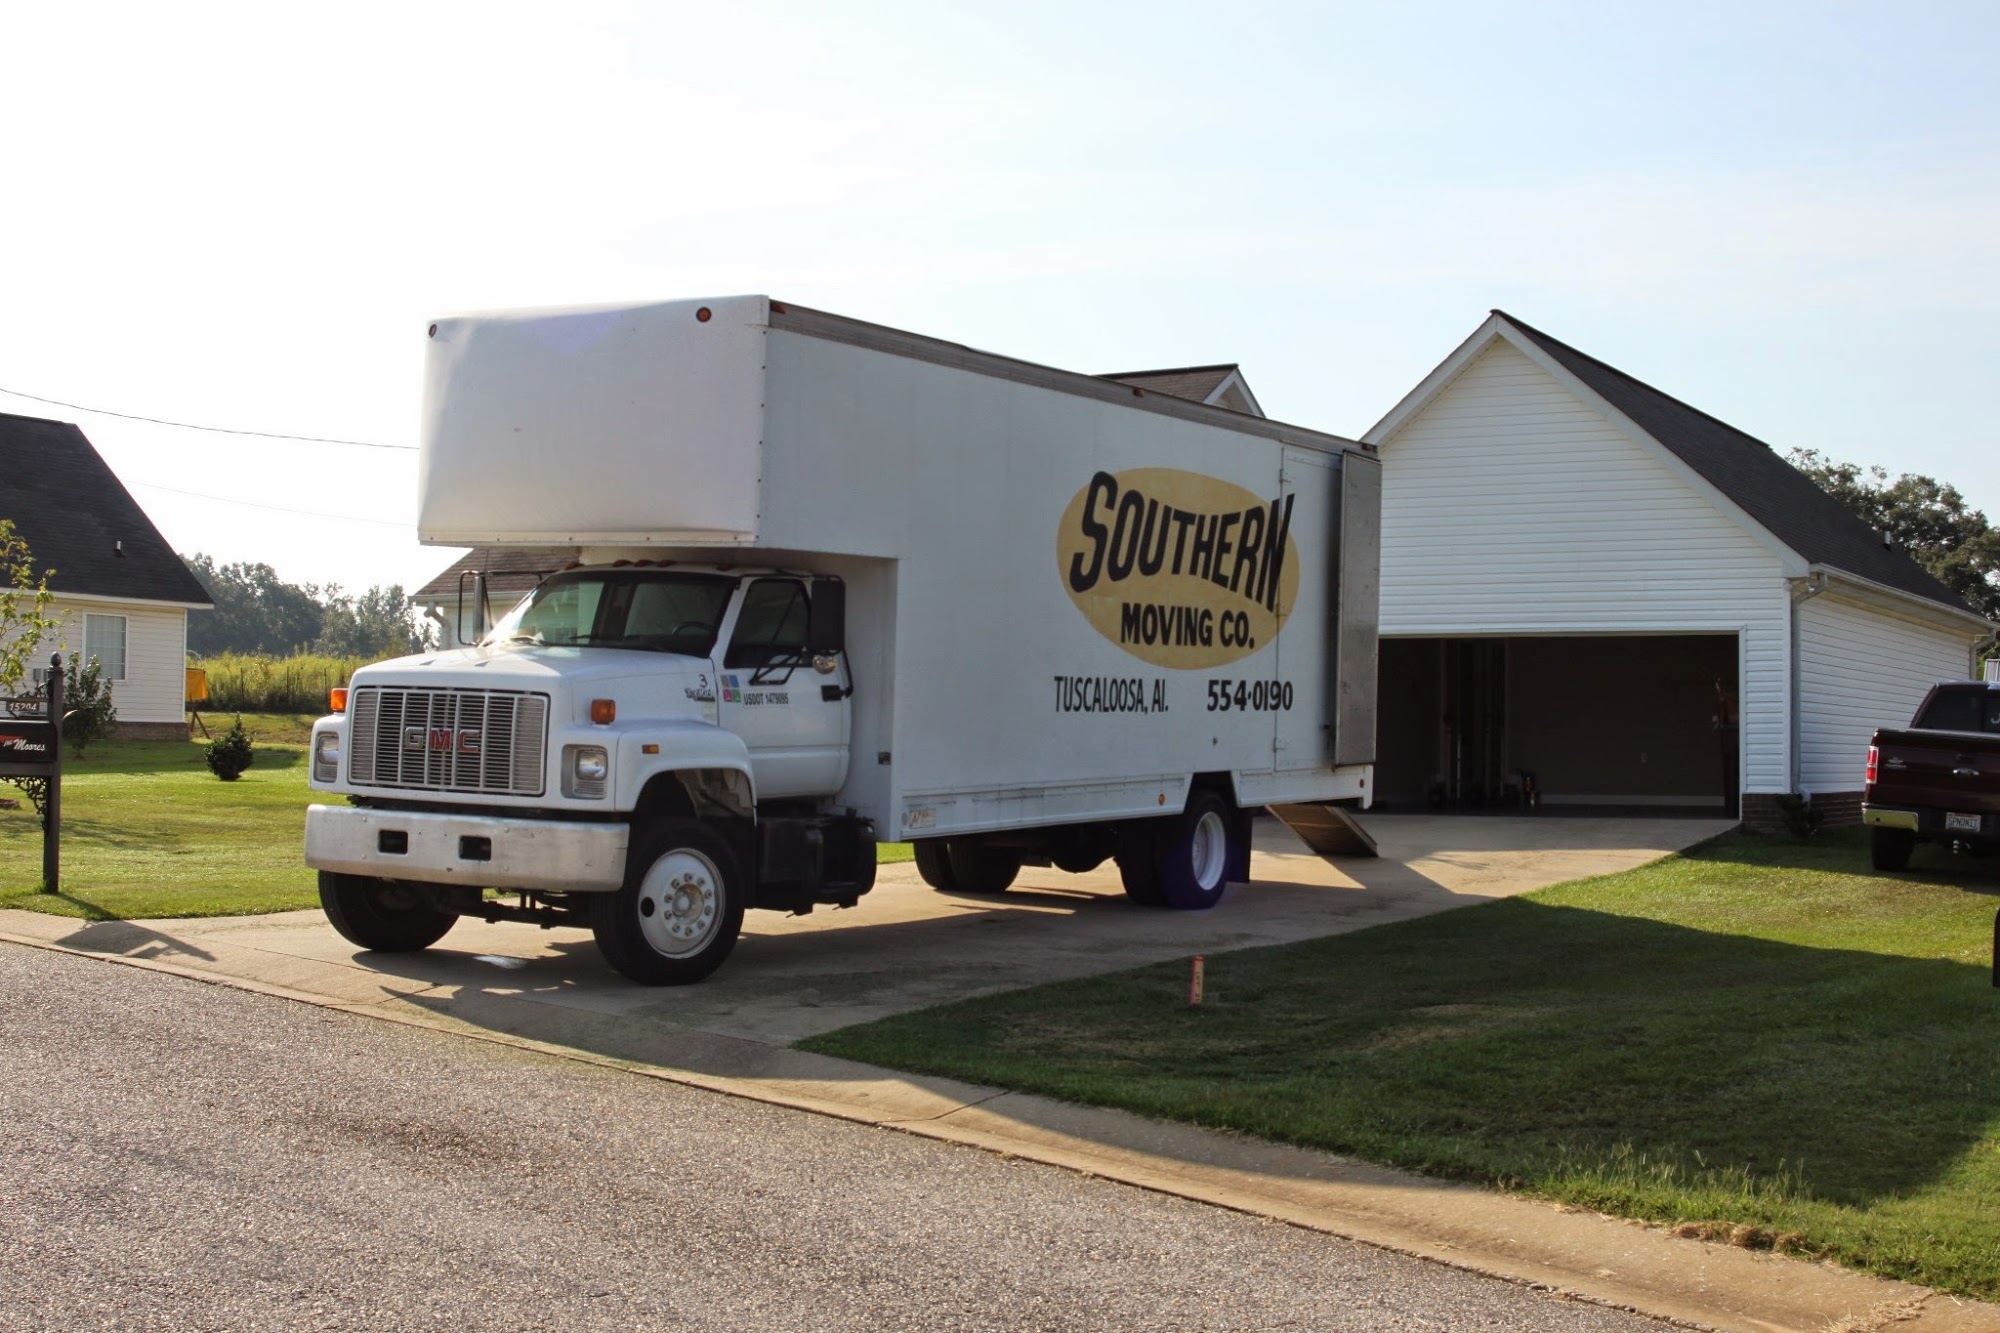 Southern Moving Co.